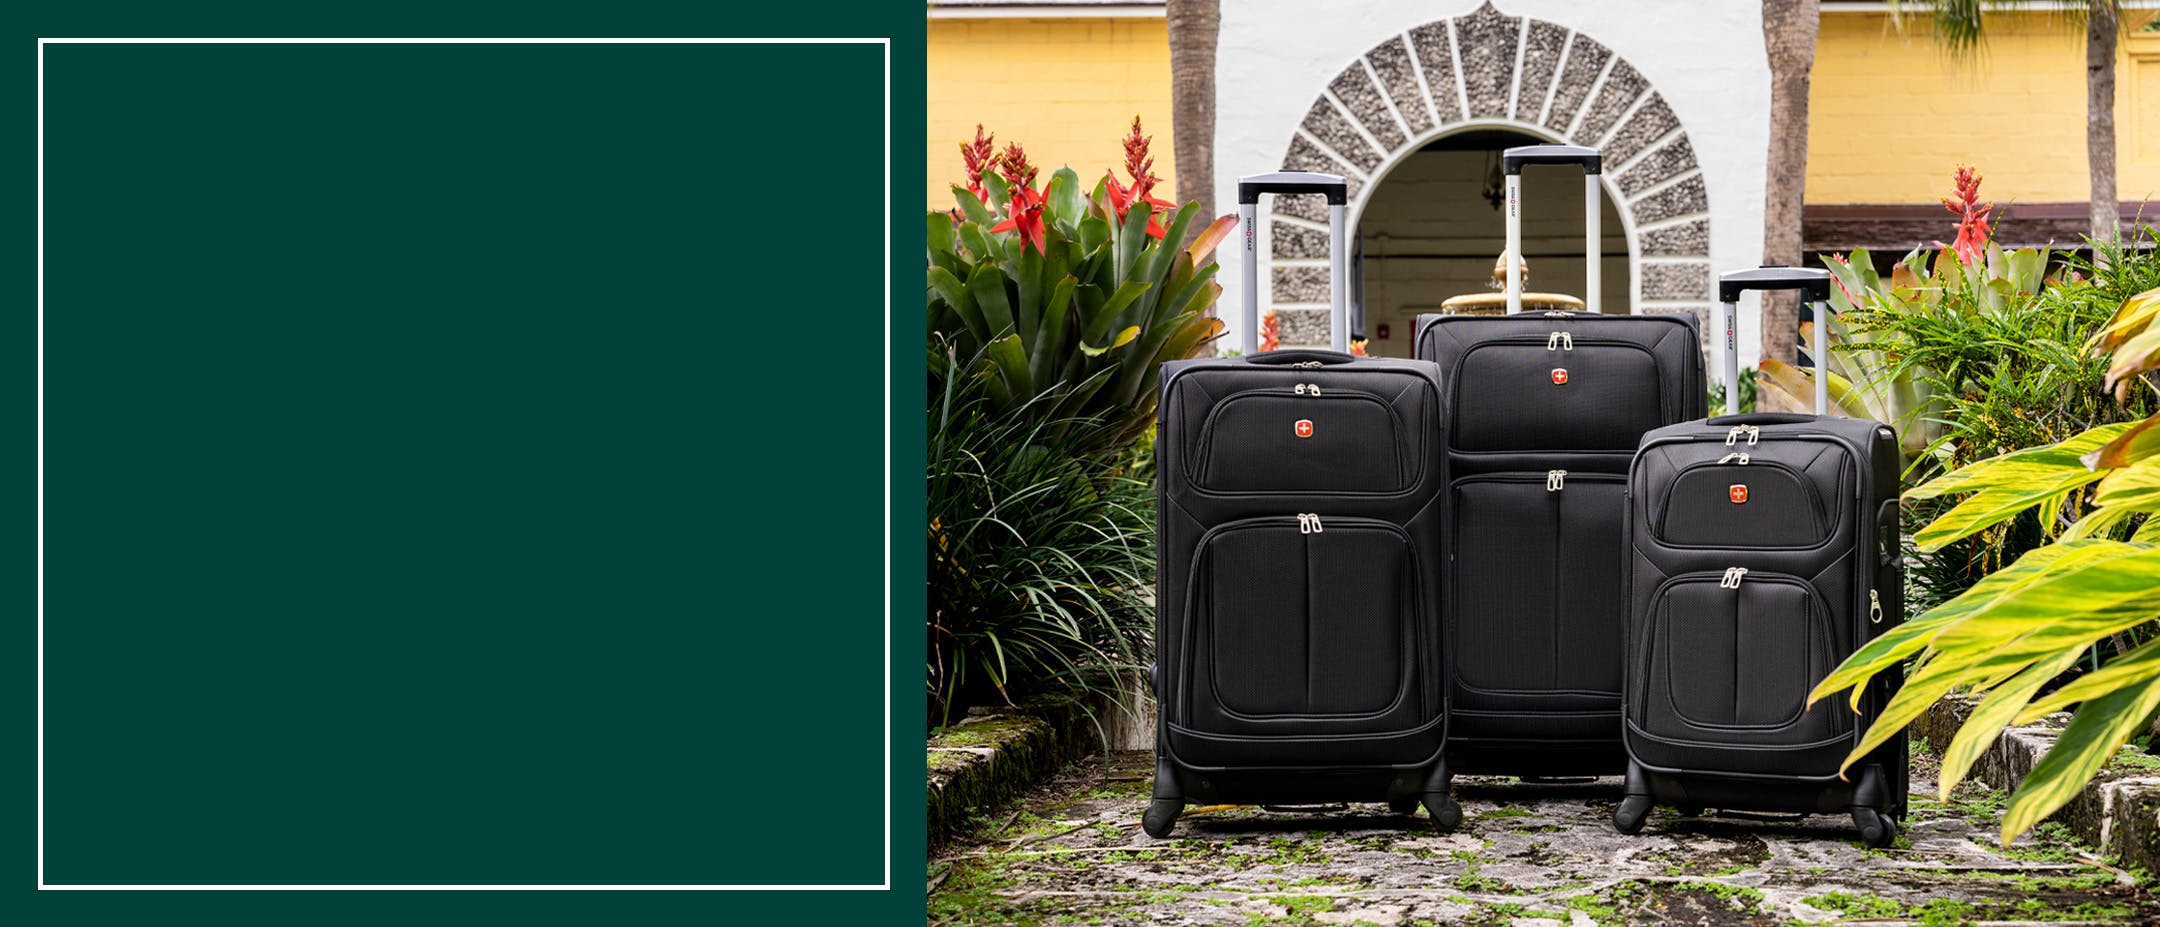 SAVE 20% ON LUGGAGE SETS + FREE GIFT